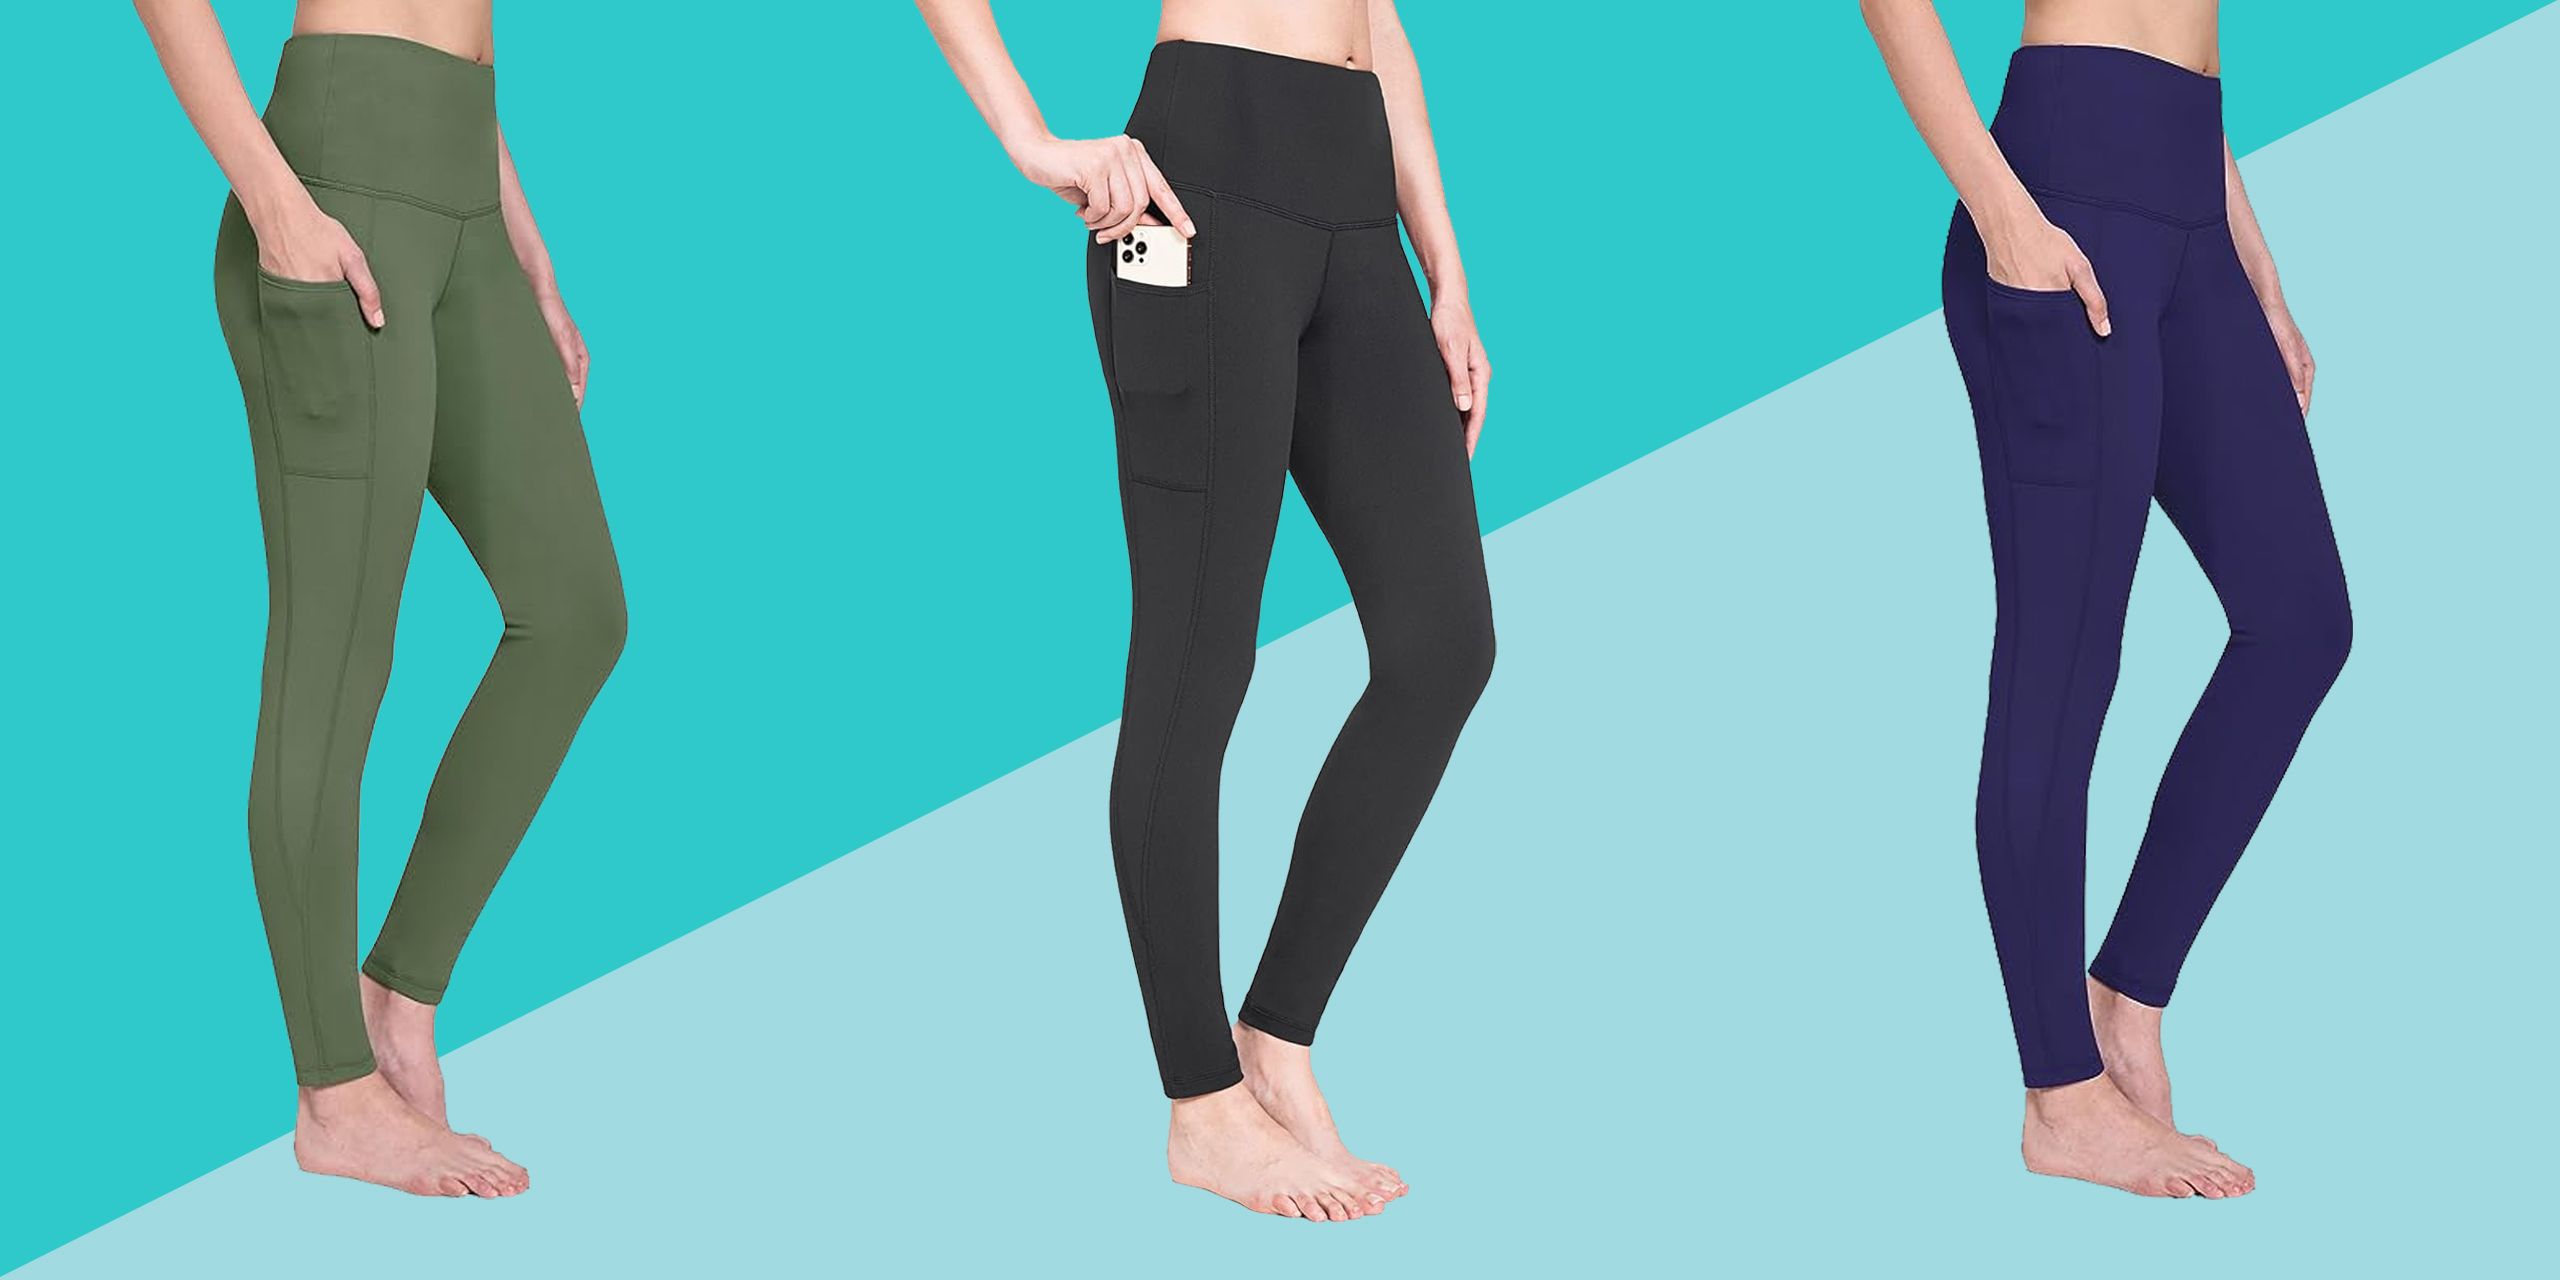 Buy Cakulo Fleece Lined Leggings for Women High Waist Yoga Athletic Running  Winter Thermal Warm Leggings with Pockets, Black, Medium at Amazon.in